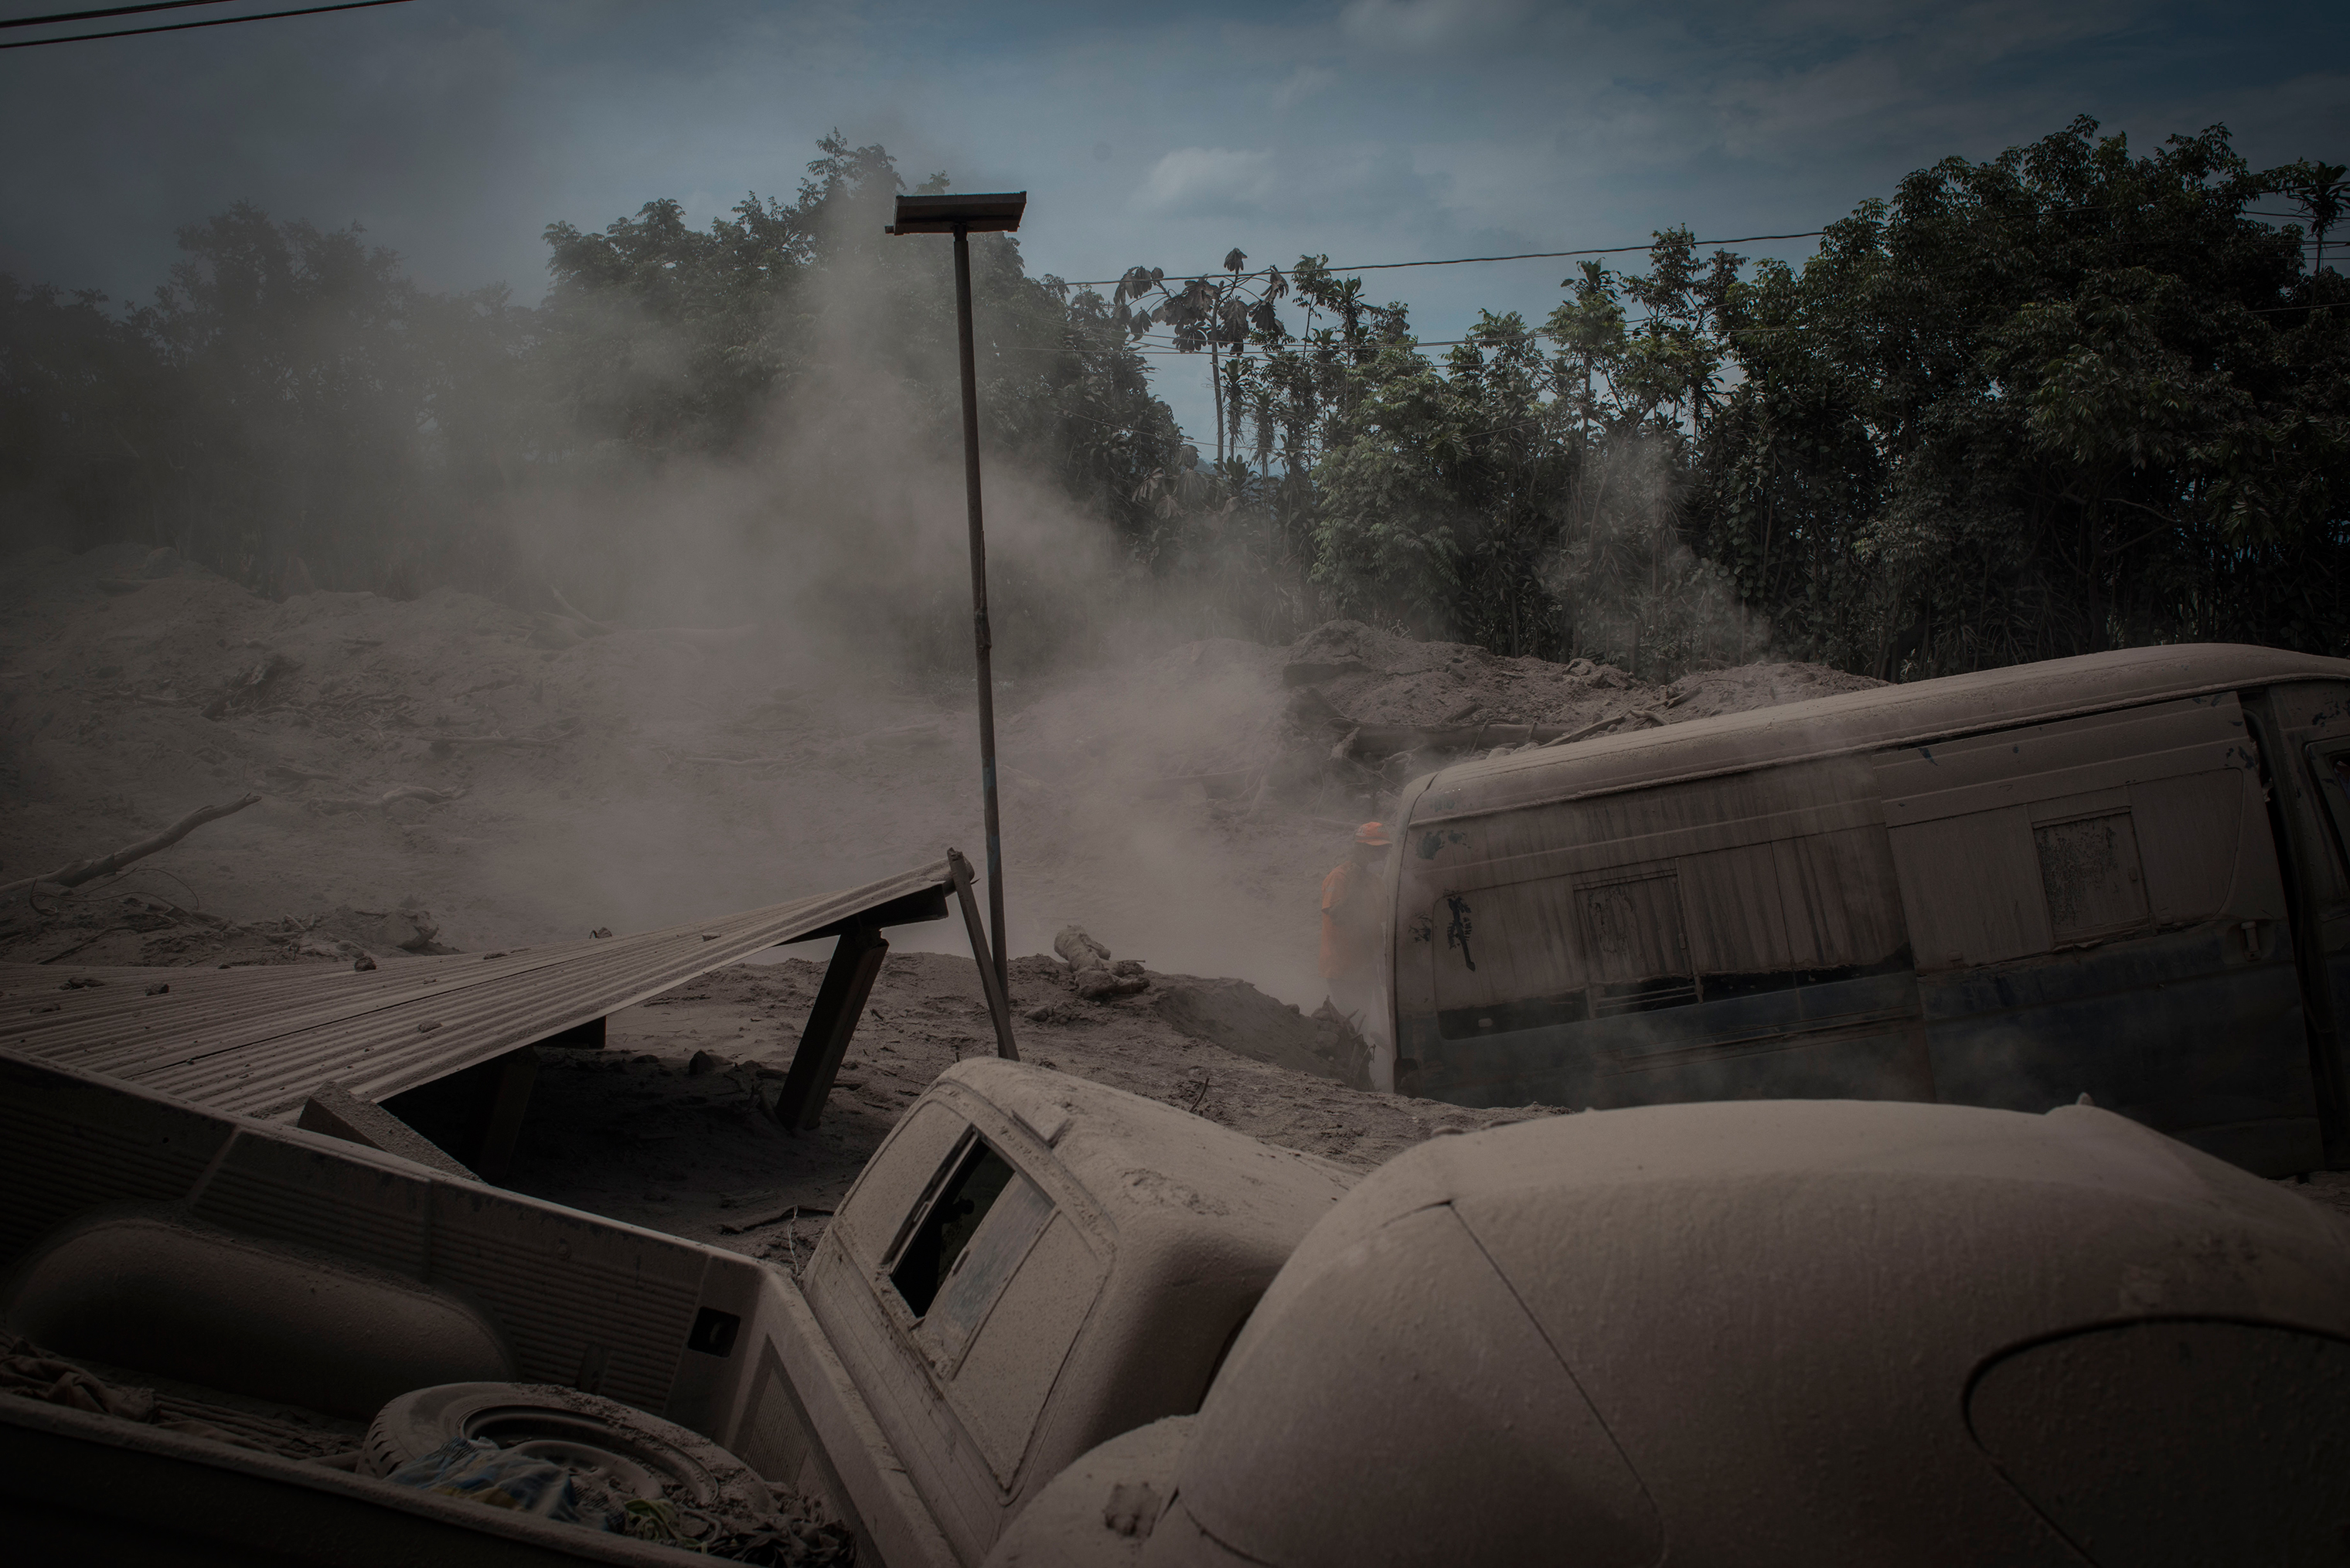 Ash-covered vehicles, destroyed in the eruption, in San Miguel Los Lotes on June 5. (Daniele Volpe)